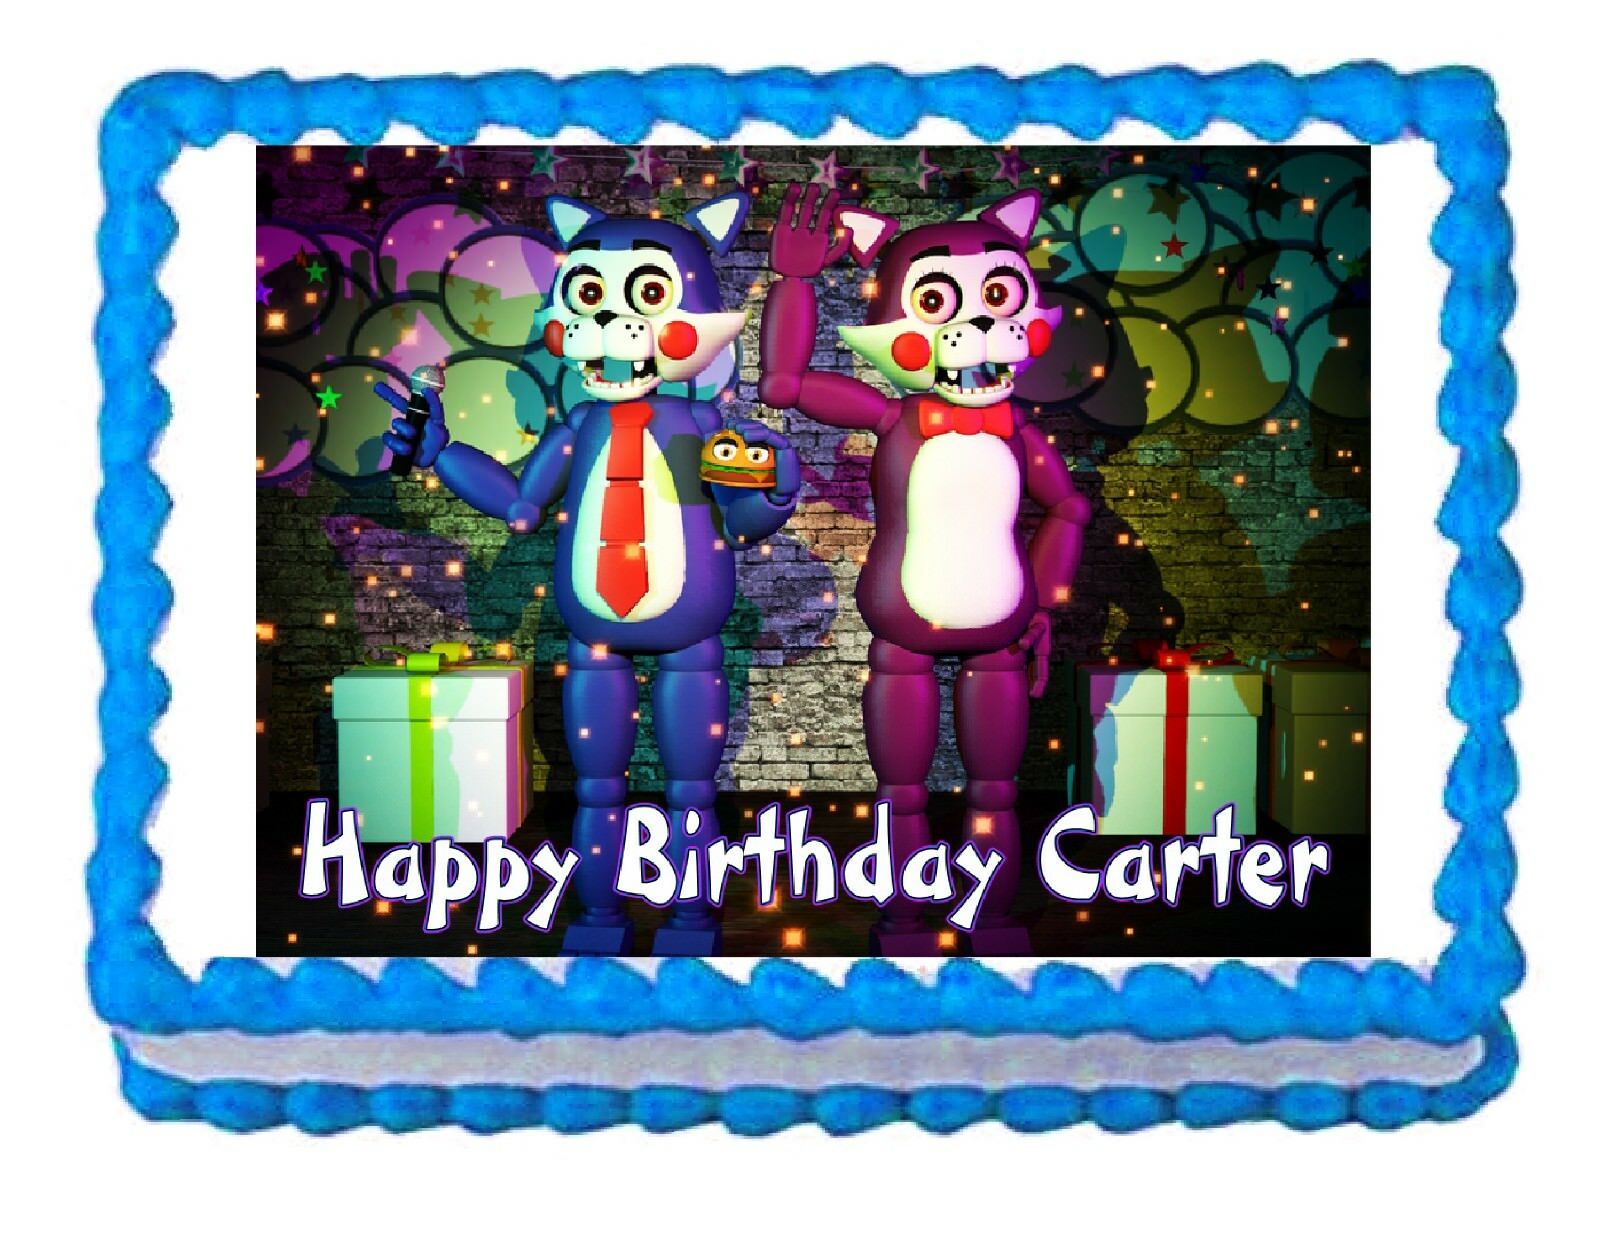 FIVE NIGHTS AT FREDDY'S Party Edible Cake topper image